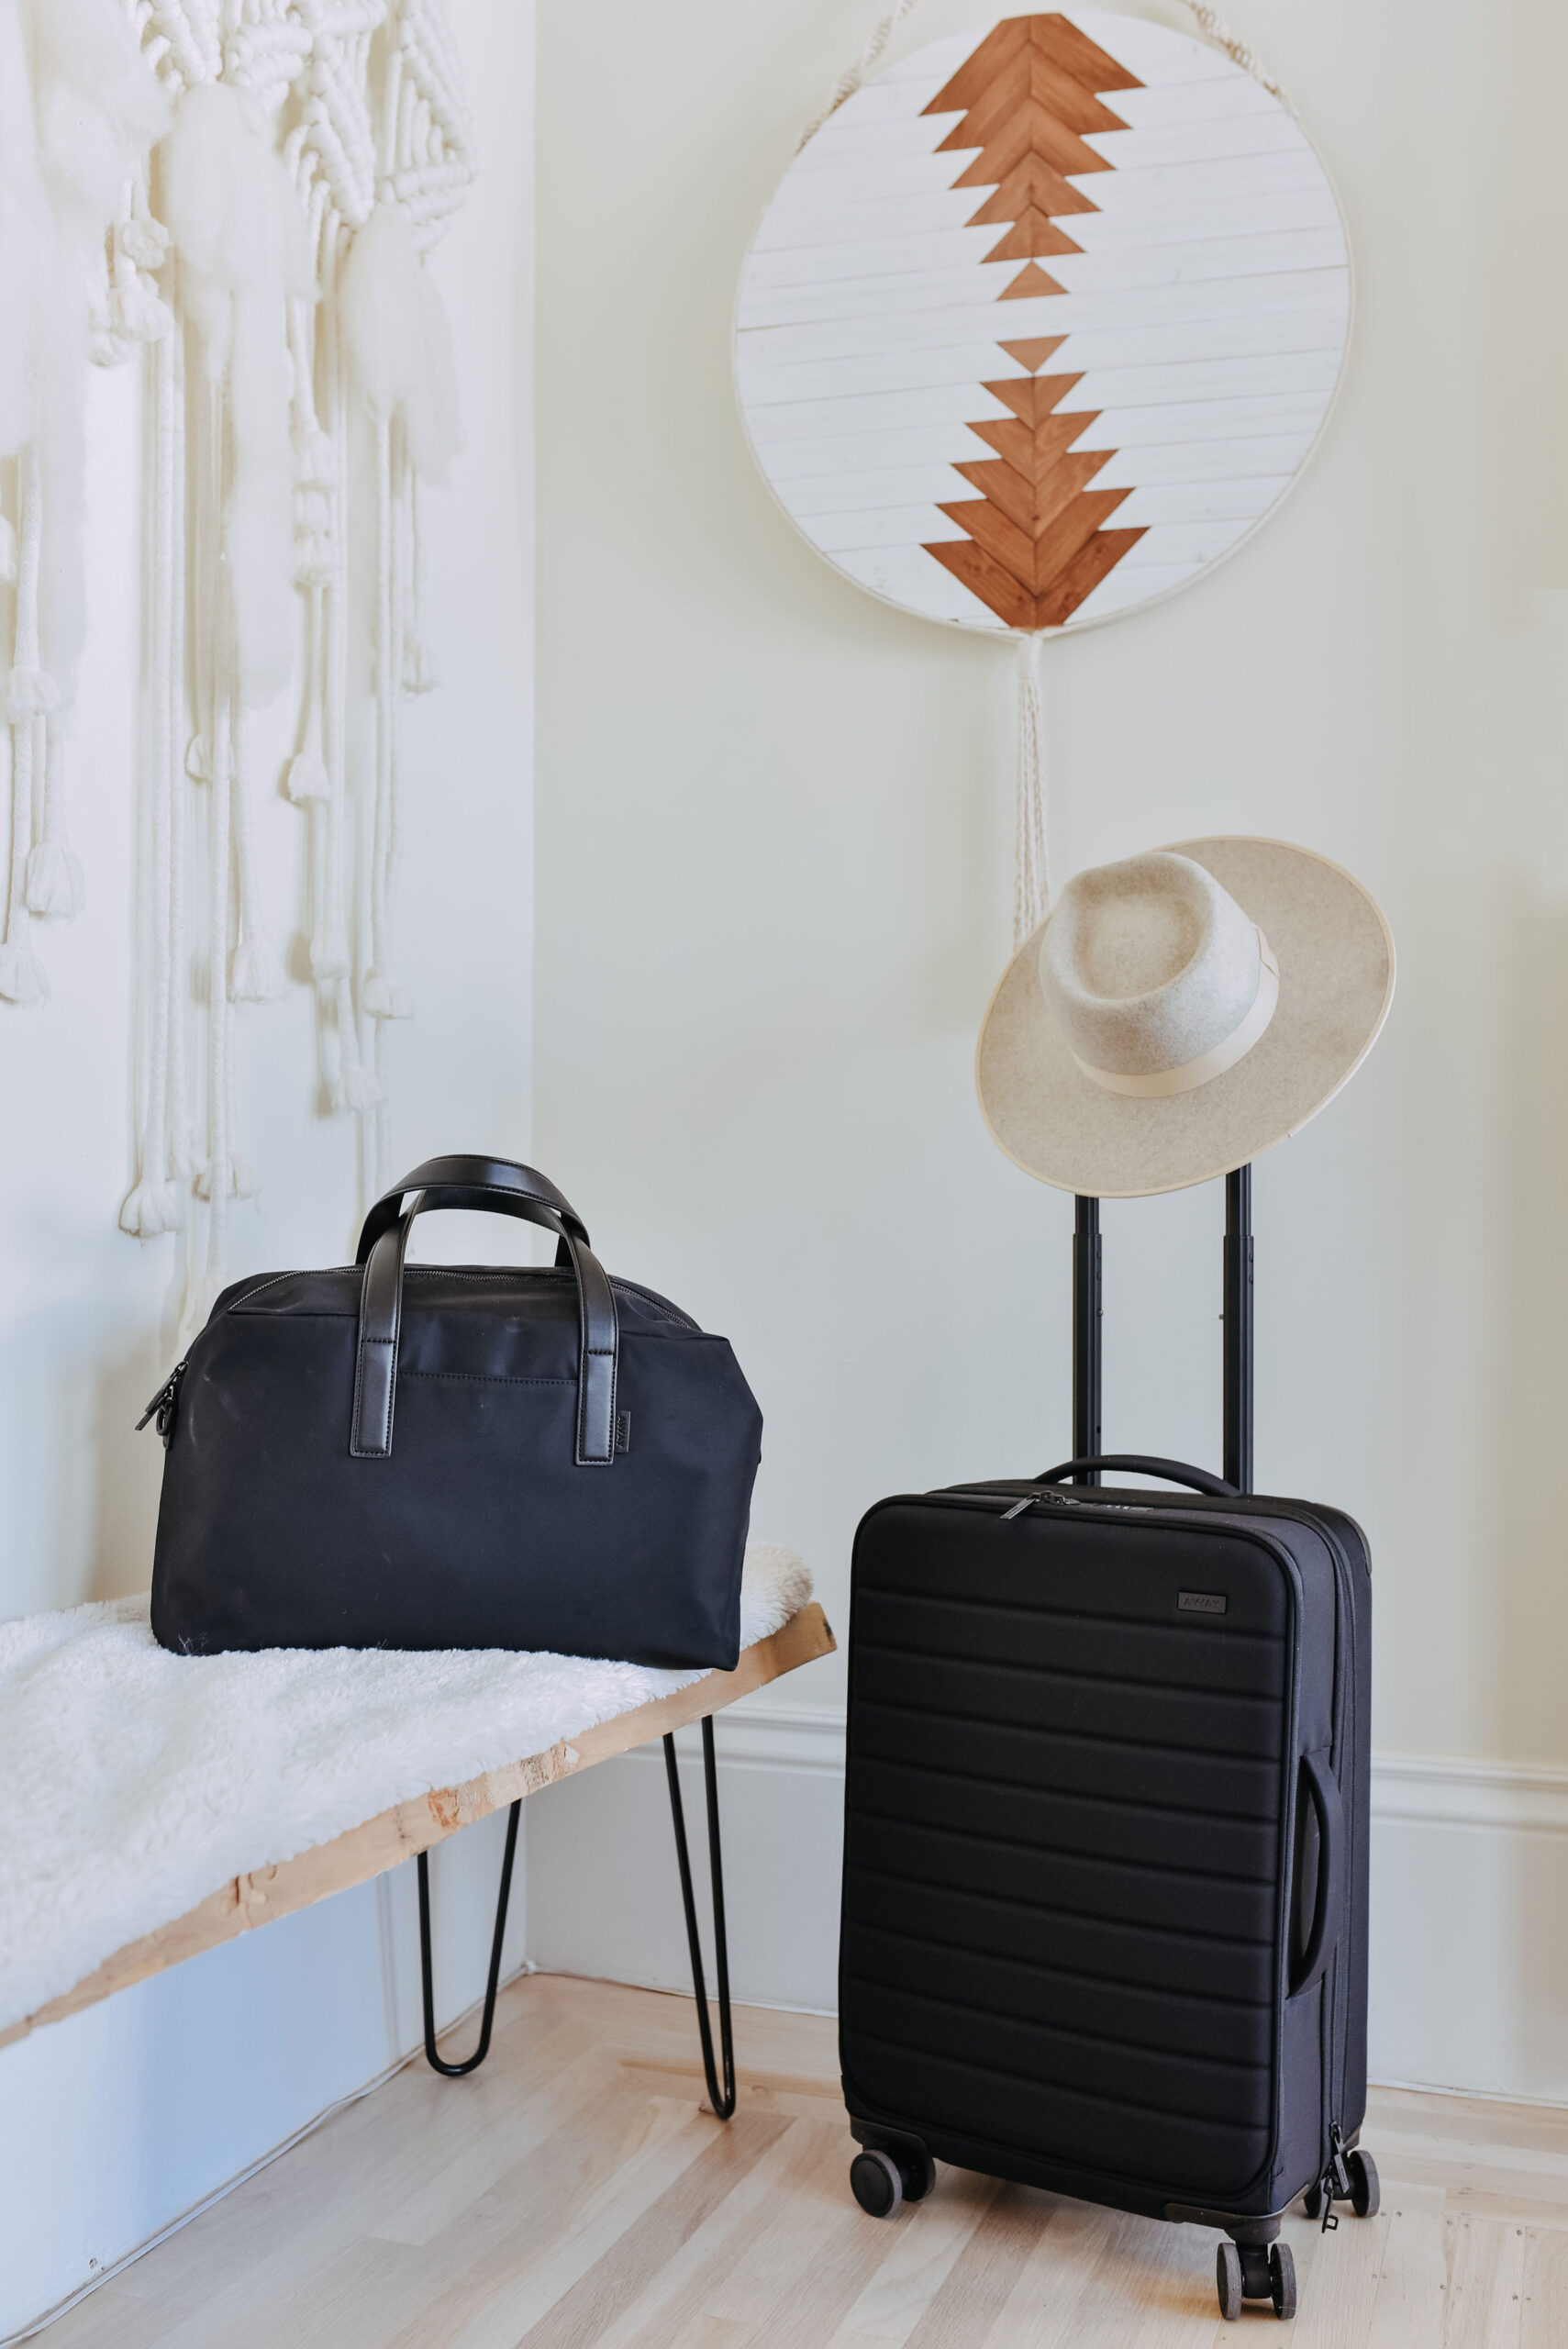 AWAY Luggage Review, The Expandable Carry-On, The Everywhere Bag